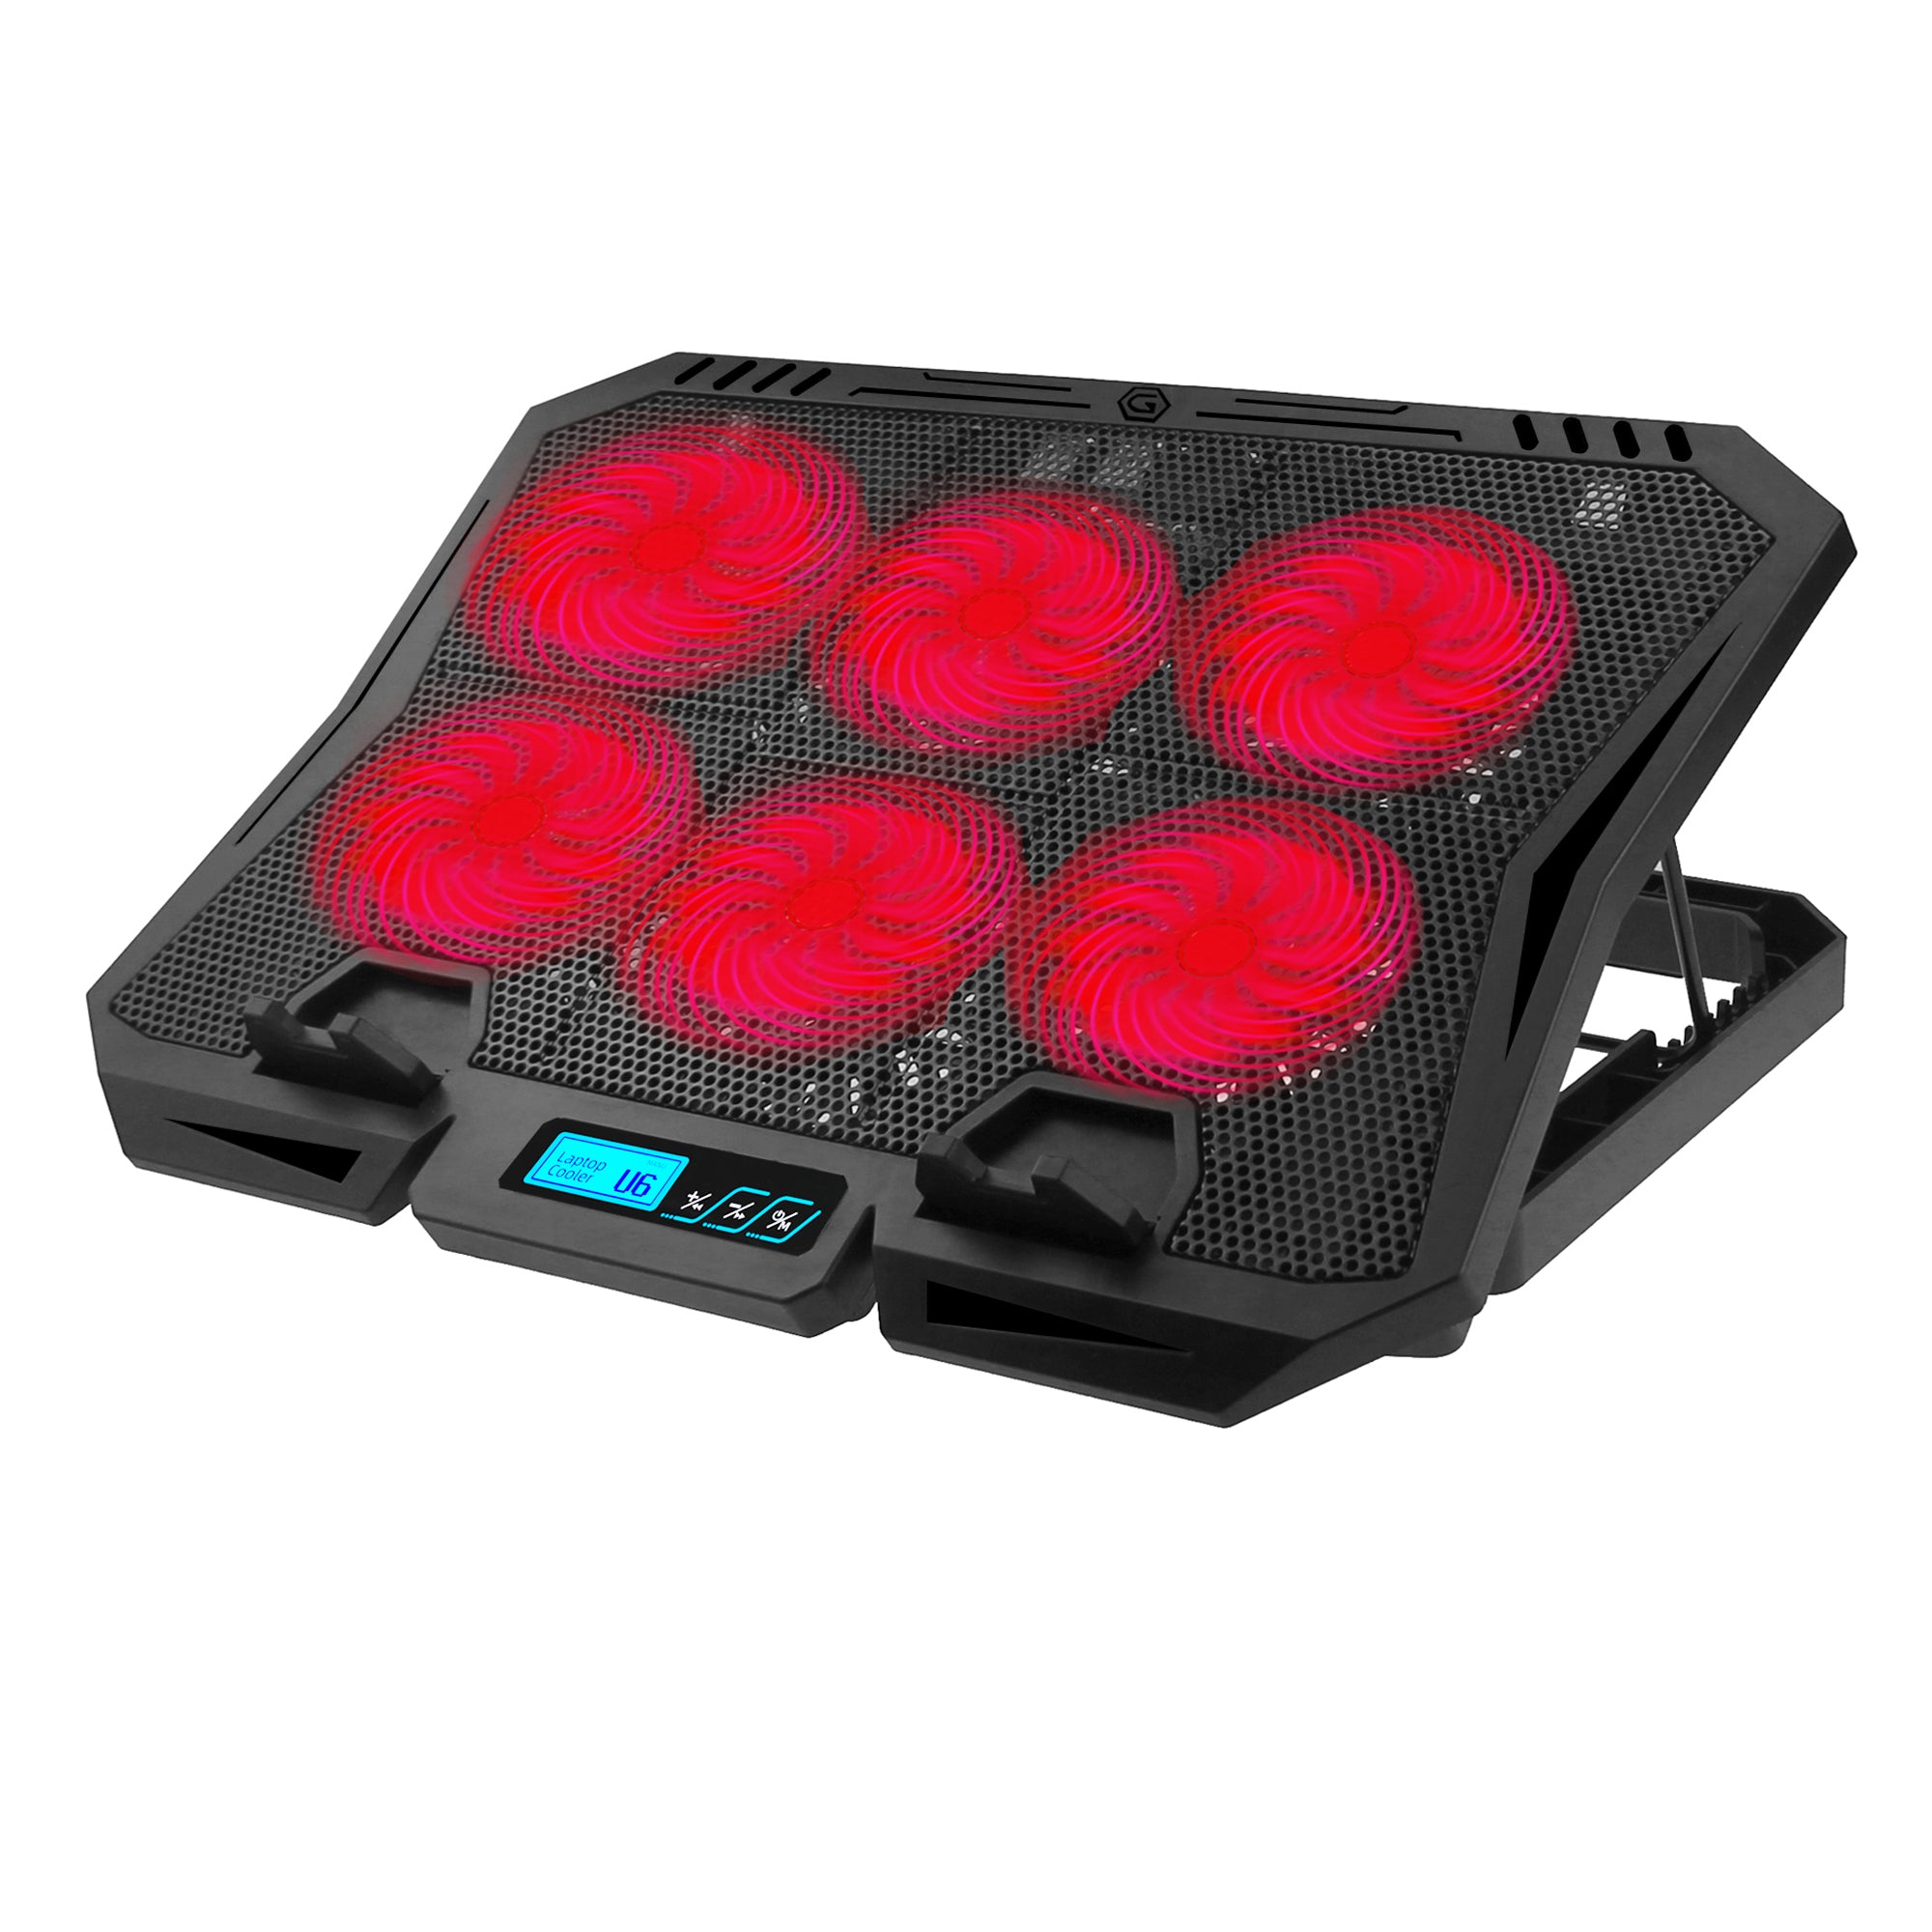 X6A 7-Gear Height Laptop Cooling Pad 6-Fan Radiator Notebook Cooler Stand with Display Screen - Red Light